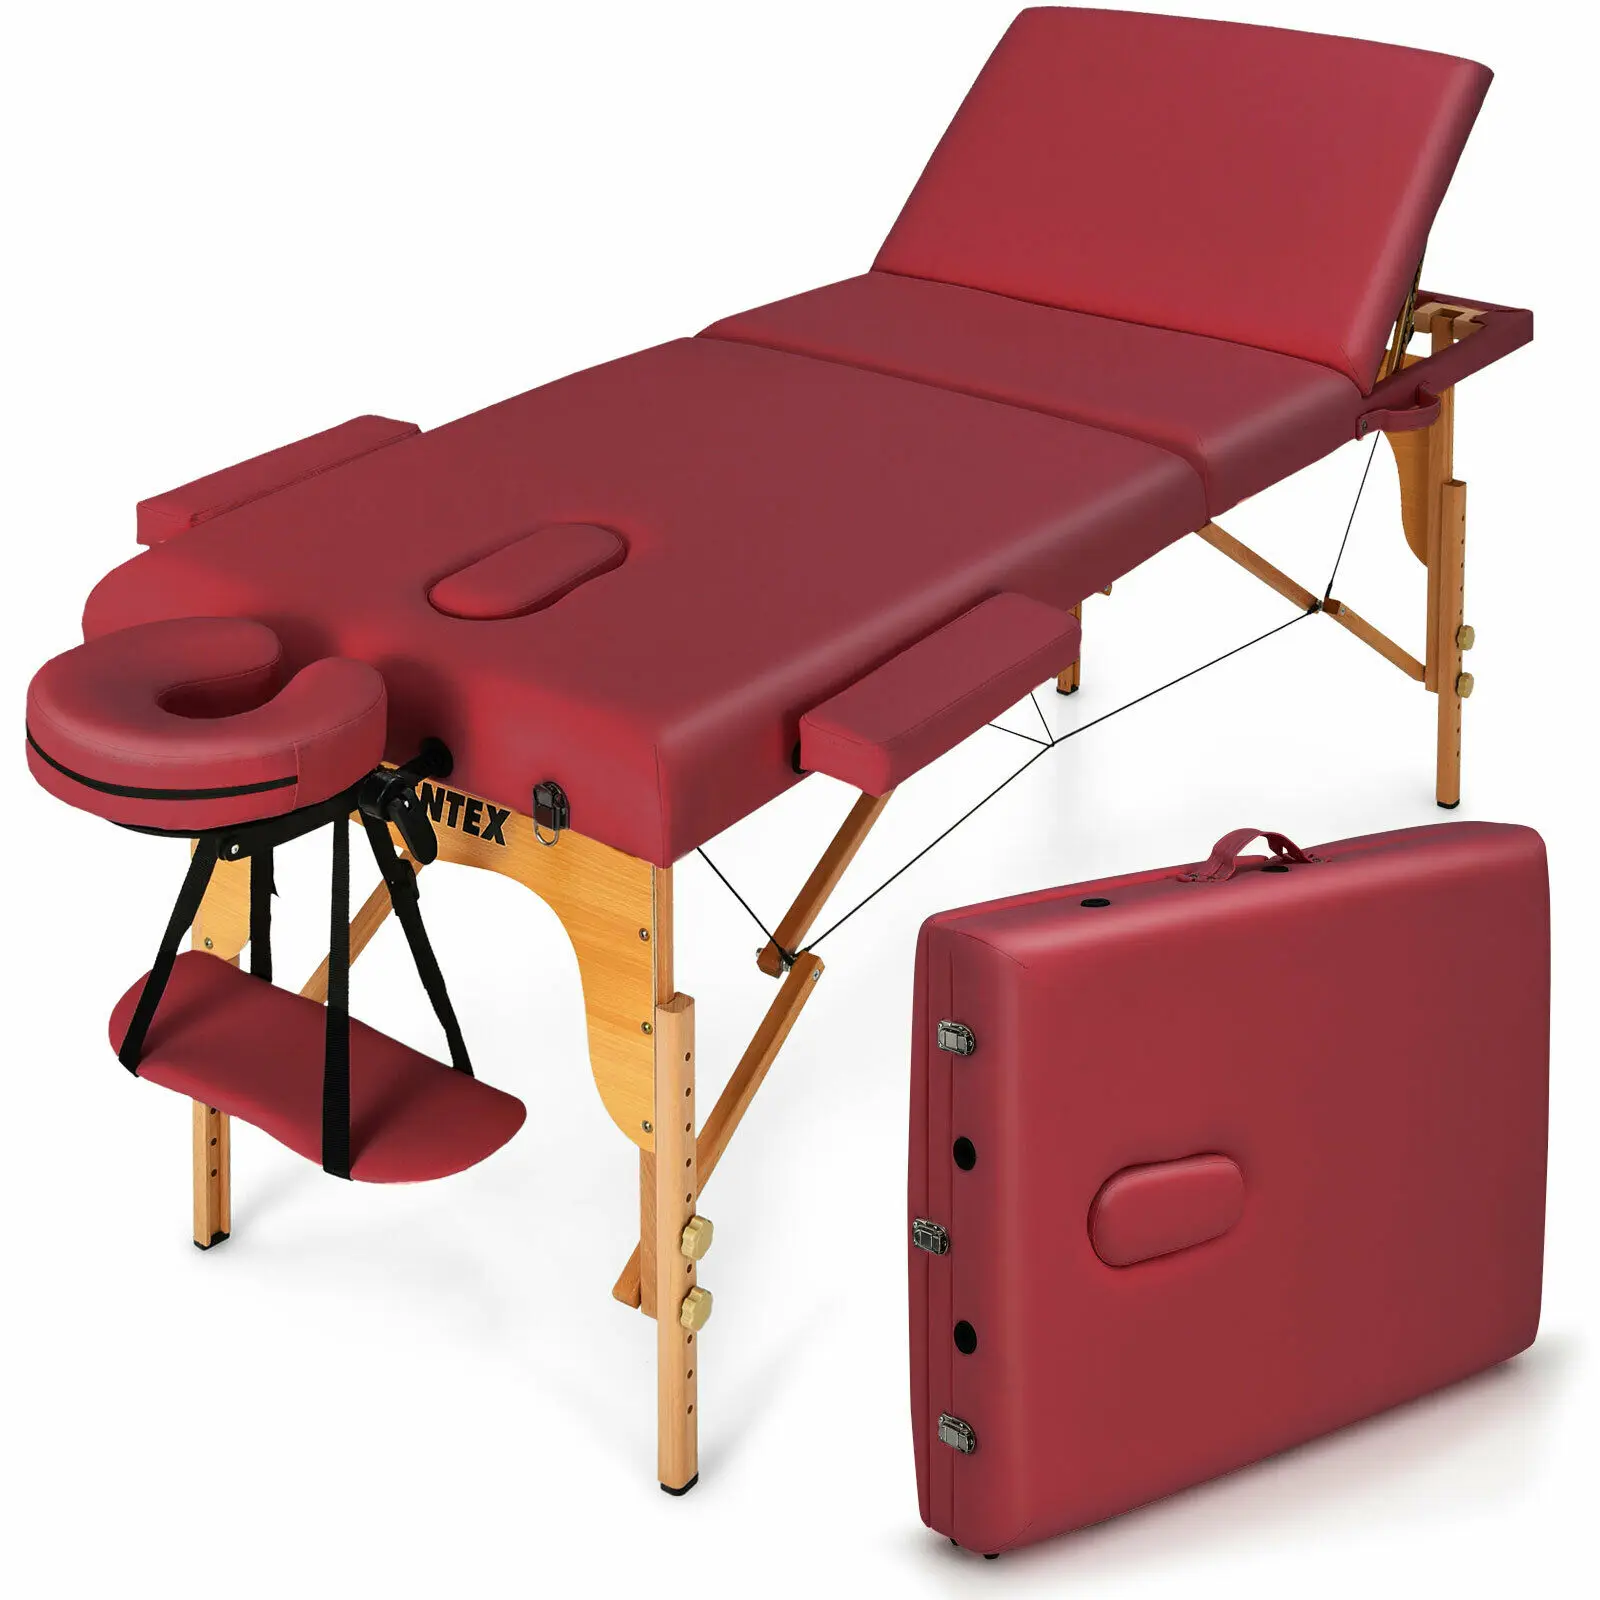 

Giantex Portable Massage Table 3 Fold 84"L Adjustable Spa Bed w/Carry Case Red HB87018RE